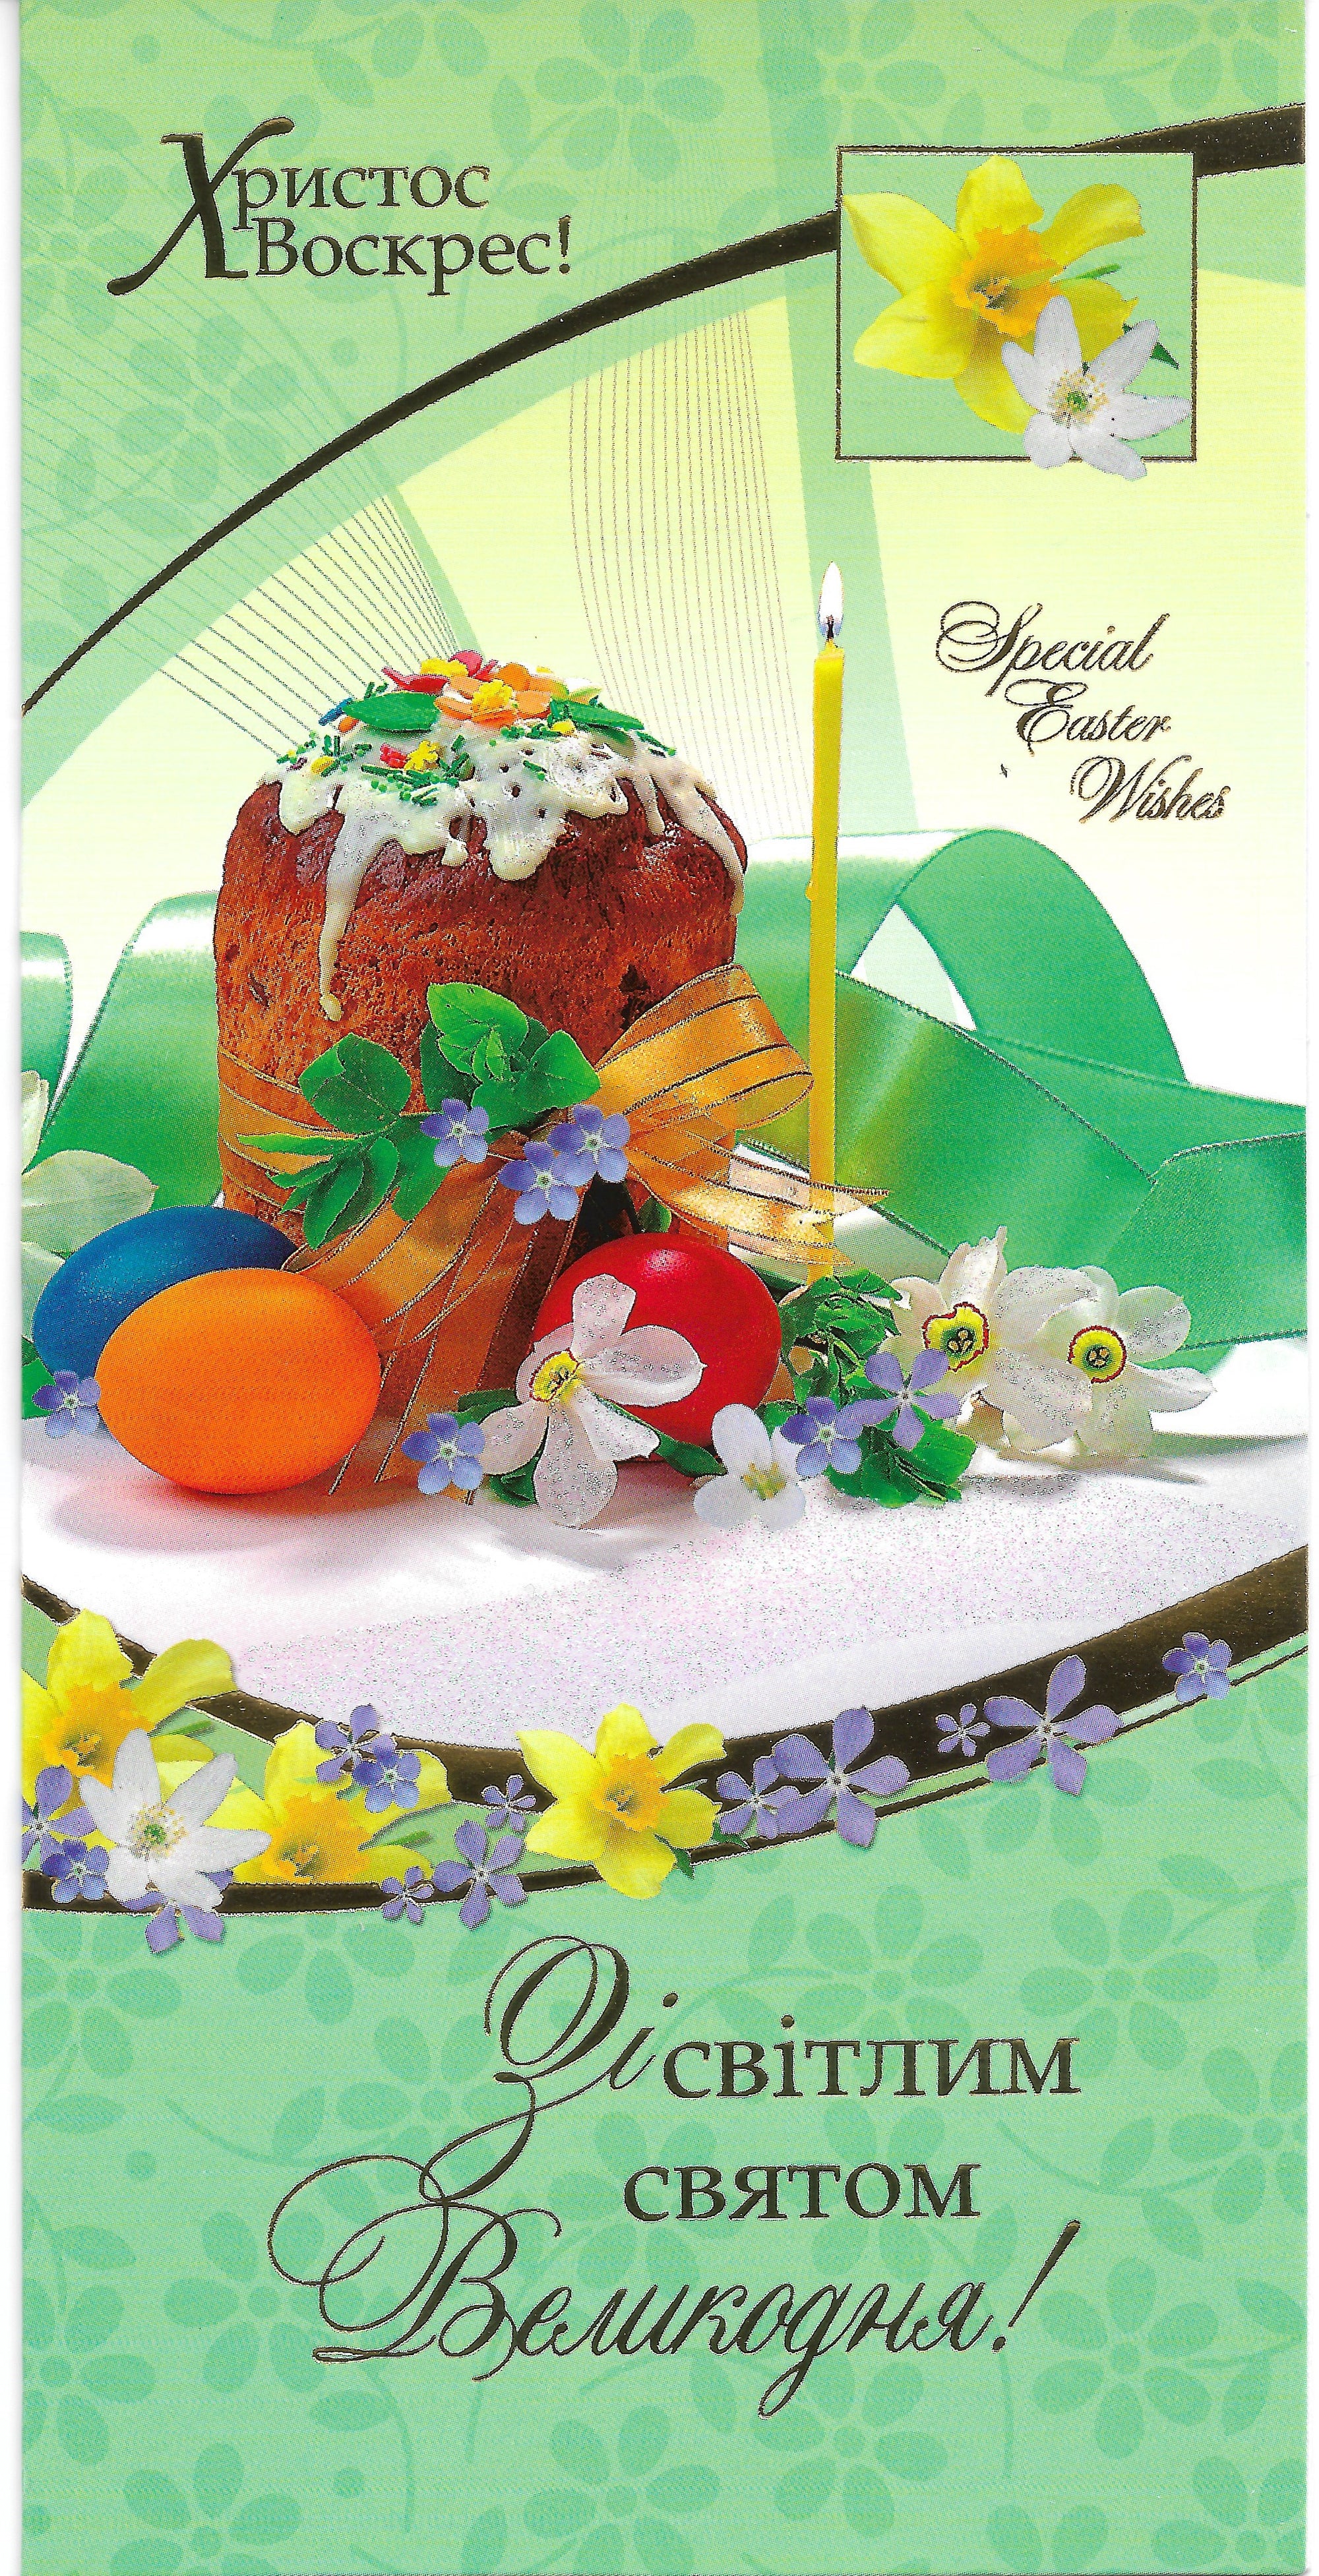 Greeting card "Special Easter wishes"